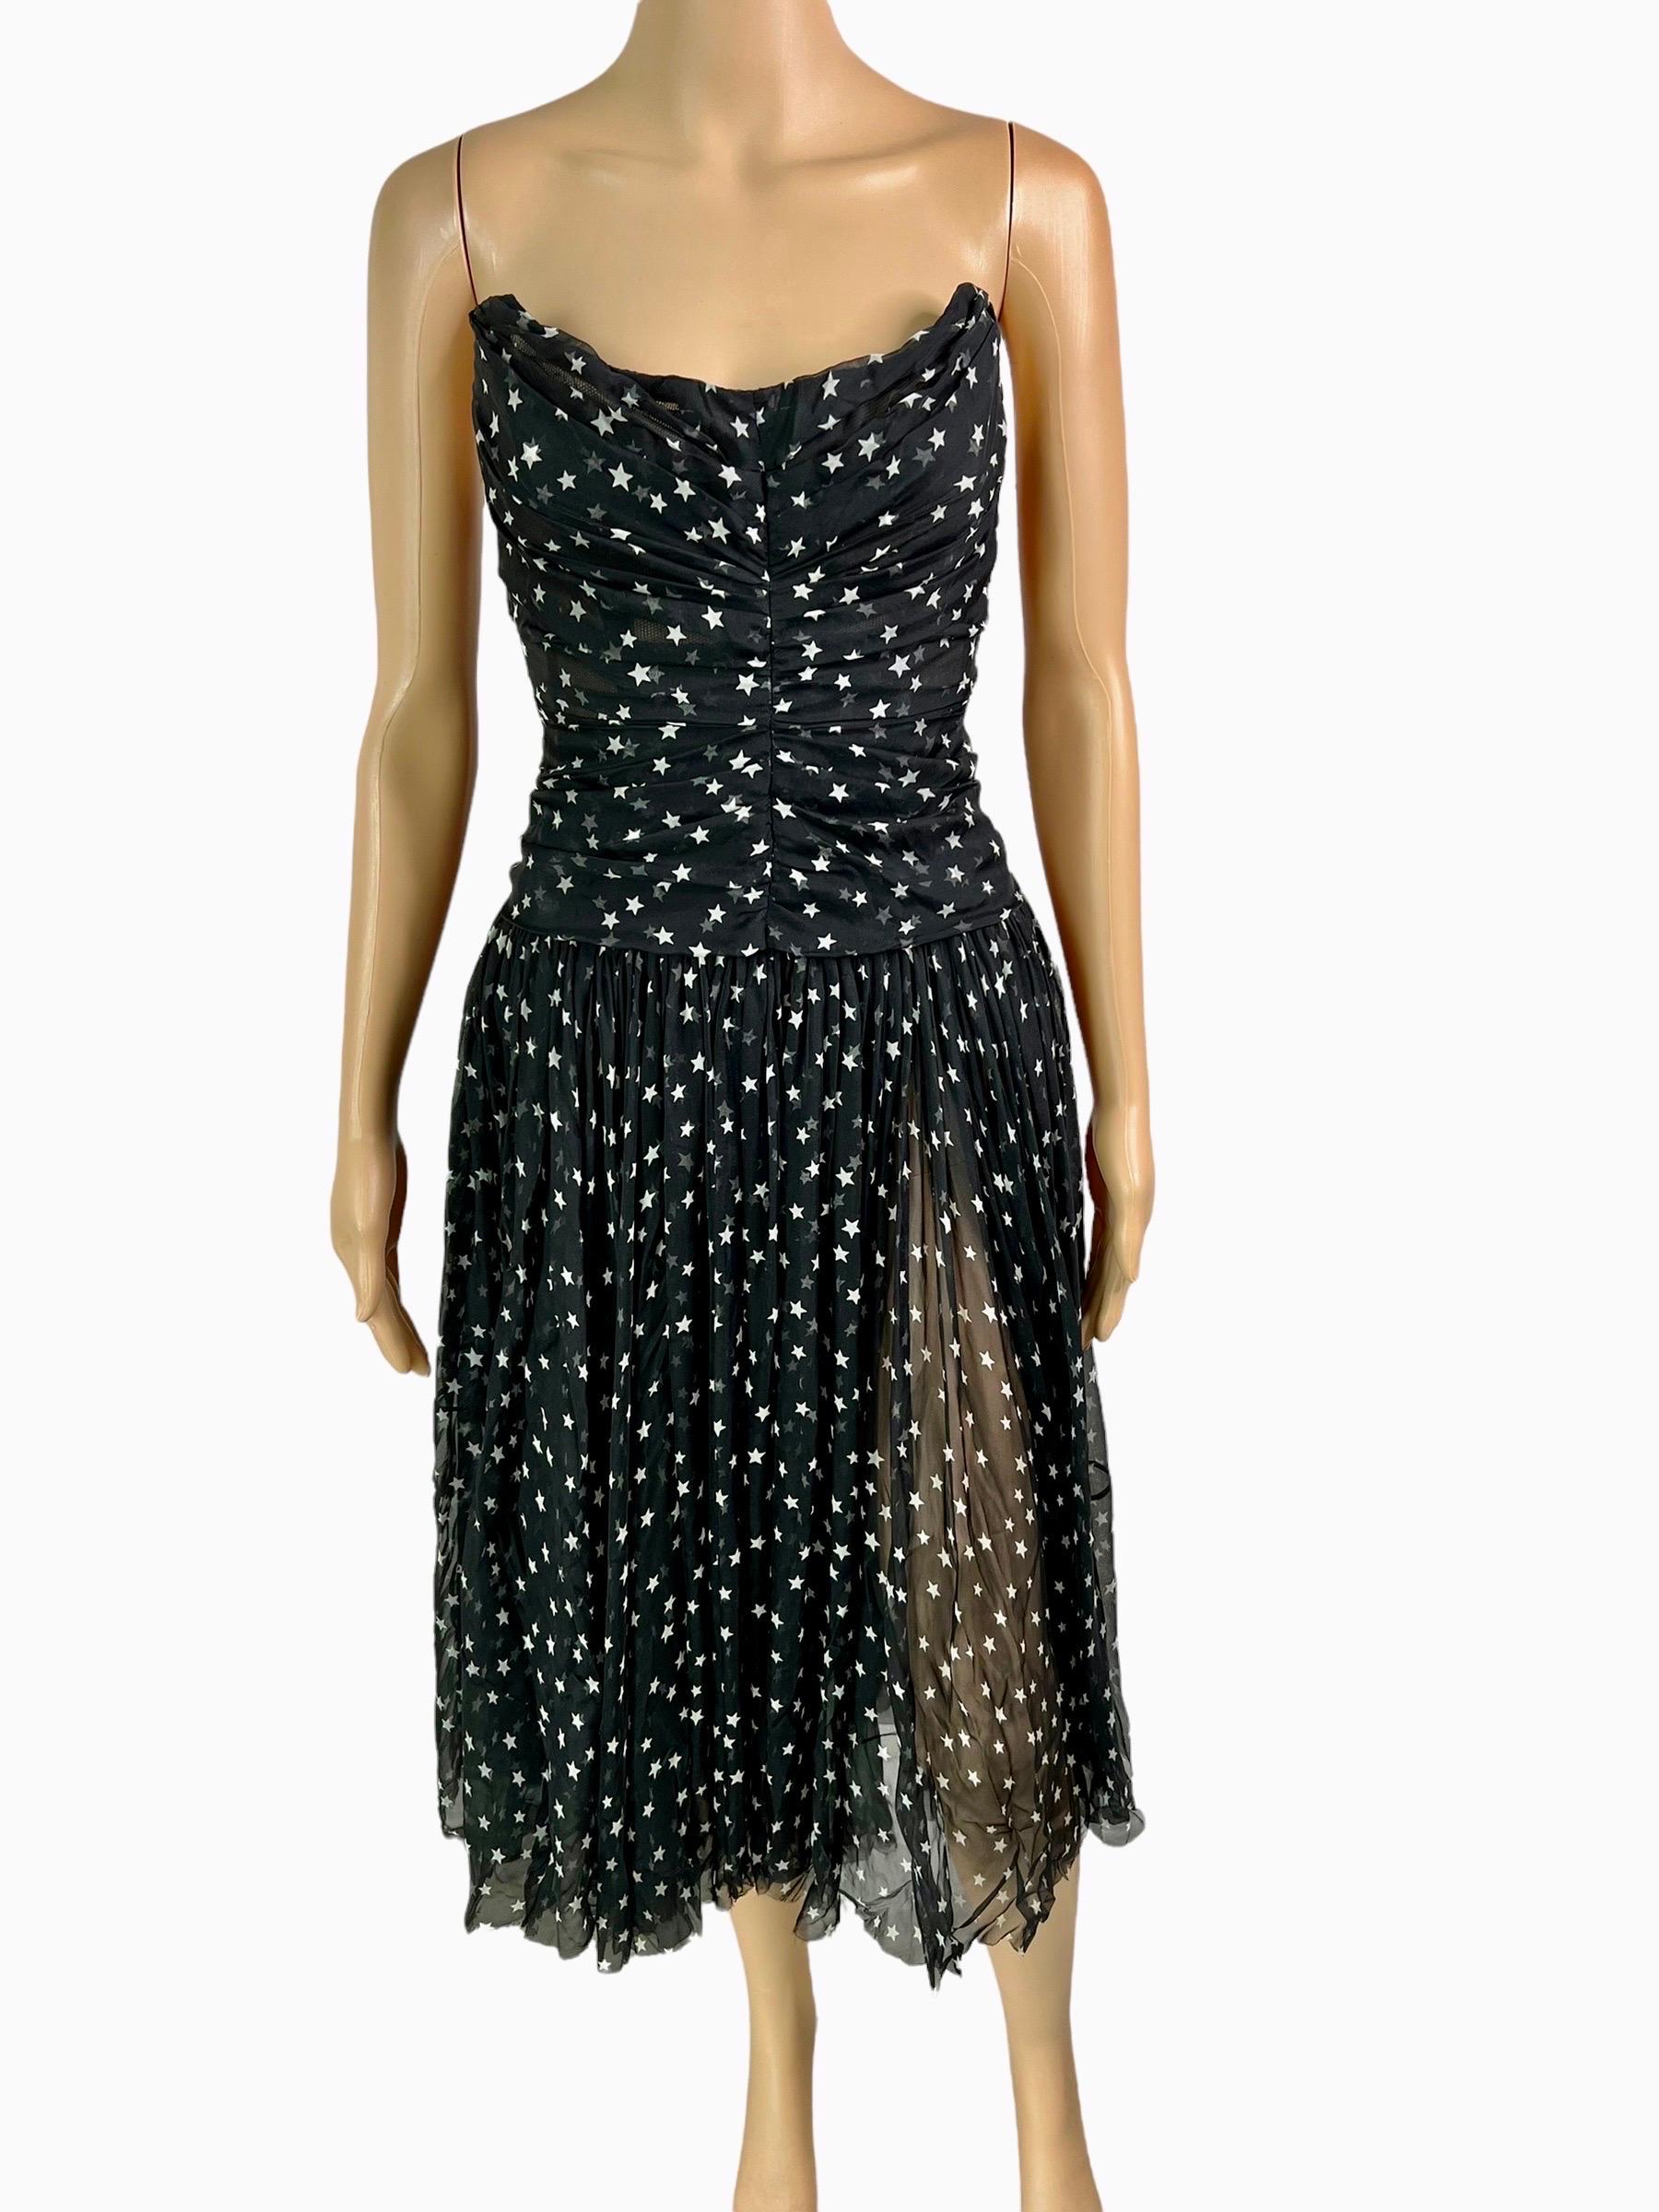 Dolce & Gabbana F/W 2011 Runway Bustier Sheer Star Print Dress IT 40

Look 67 from the Fall 2011 Collection.

Excellent Condition.
